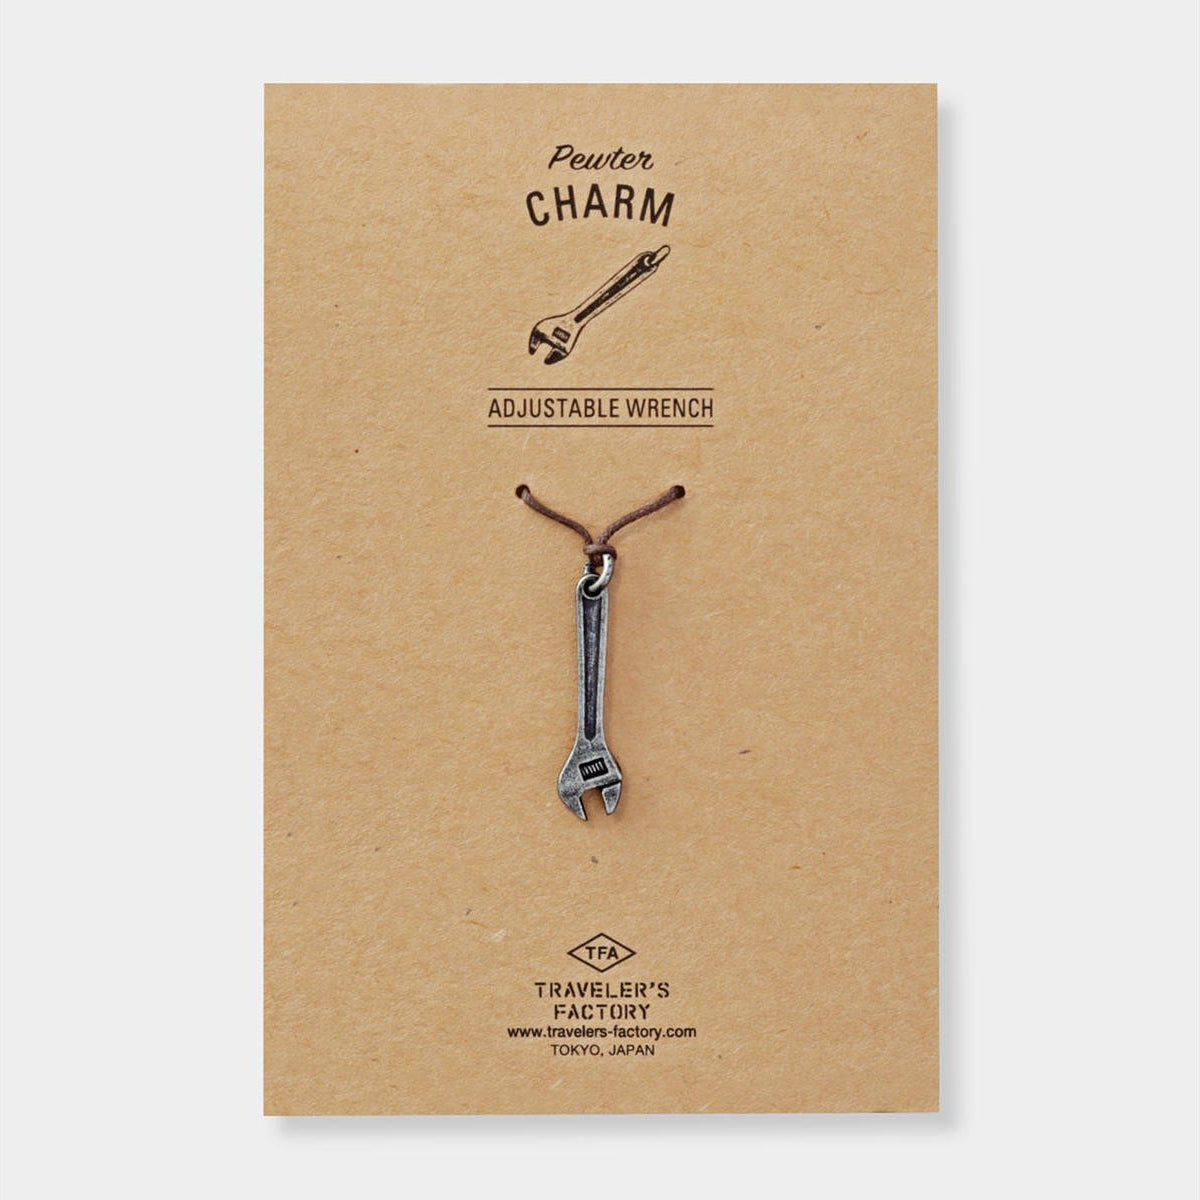 TRAVELERS FACTORY Charm Wrench